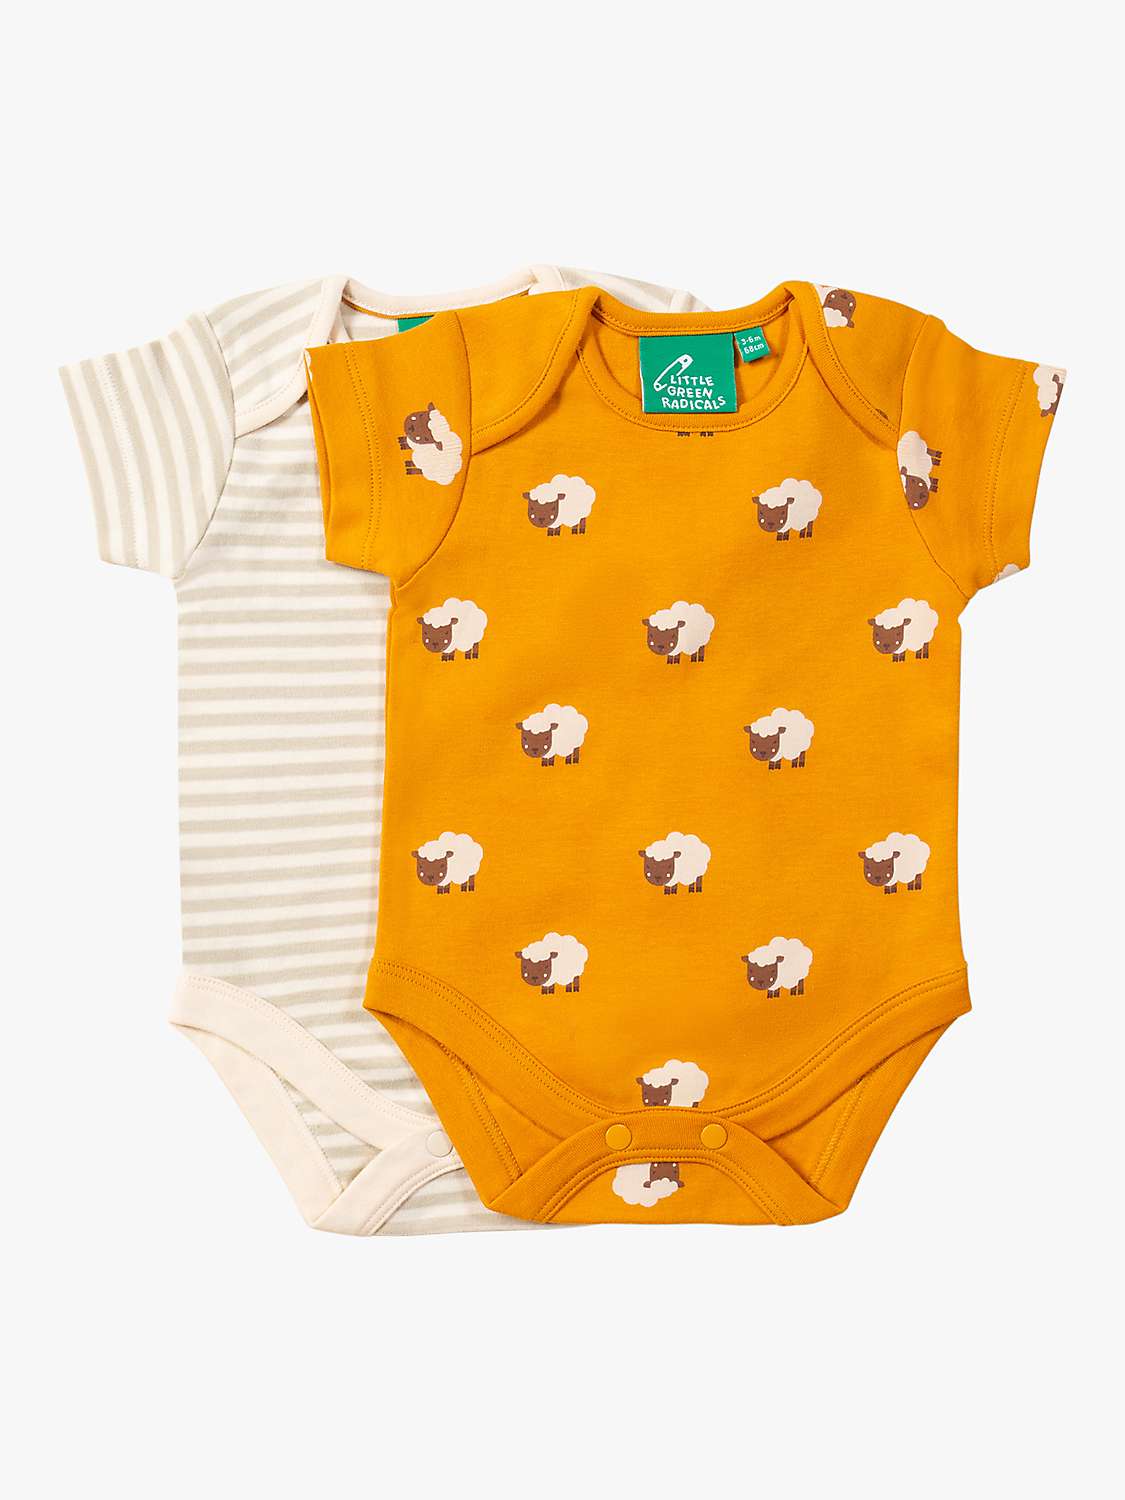 Buy Little Green Radicals Baby Organic Cotton Counting Sheep Bodysuits, Pack of 2, Yellow/Multi Online at johnlewis.com